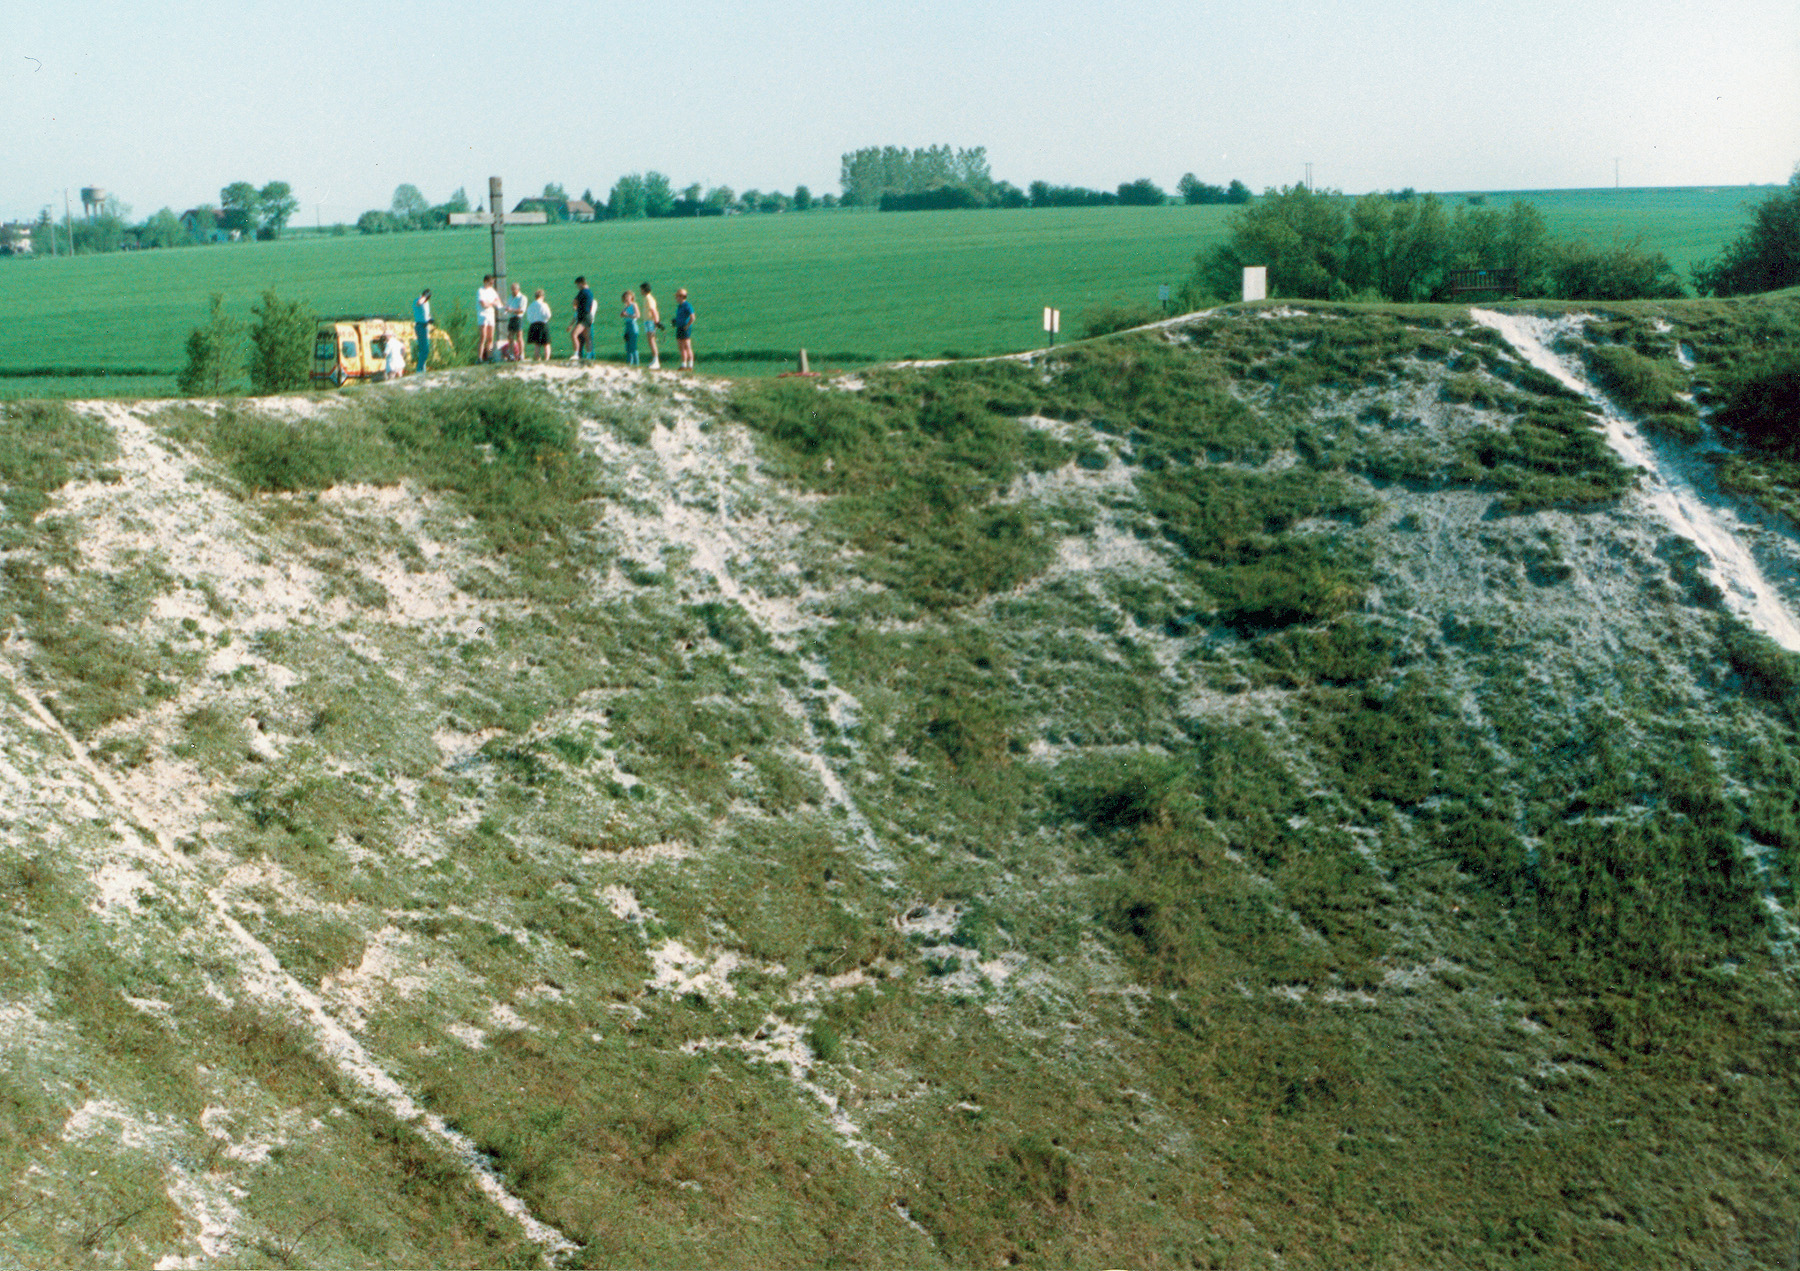 Visitors to the Somme battlefield add scale to the remains of the enormous Lochnager Crater. Explosives set off beneath a portion of the German trenches made the gigantic hole on the first morning of the attack.